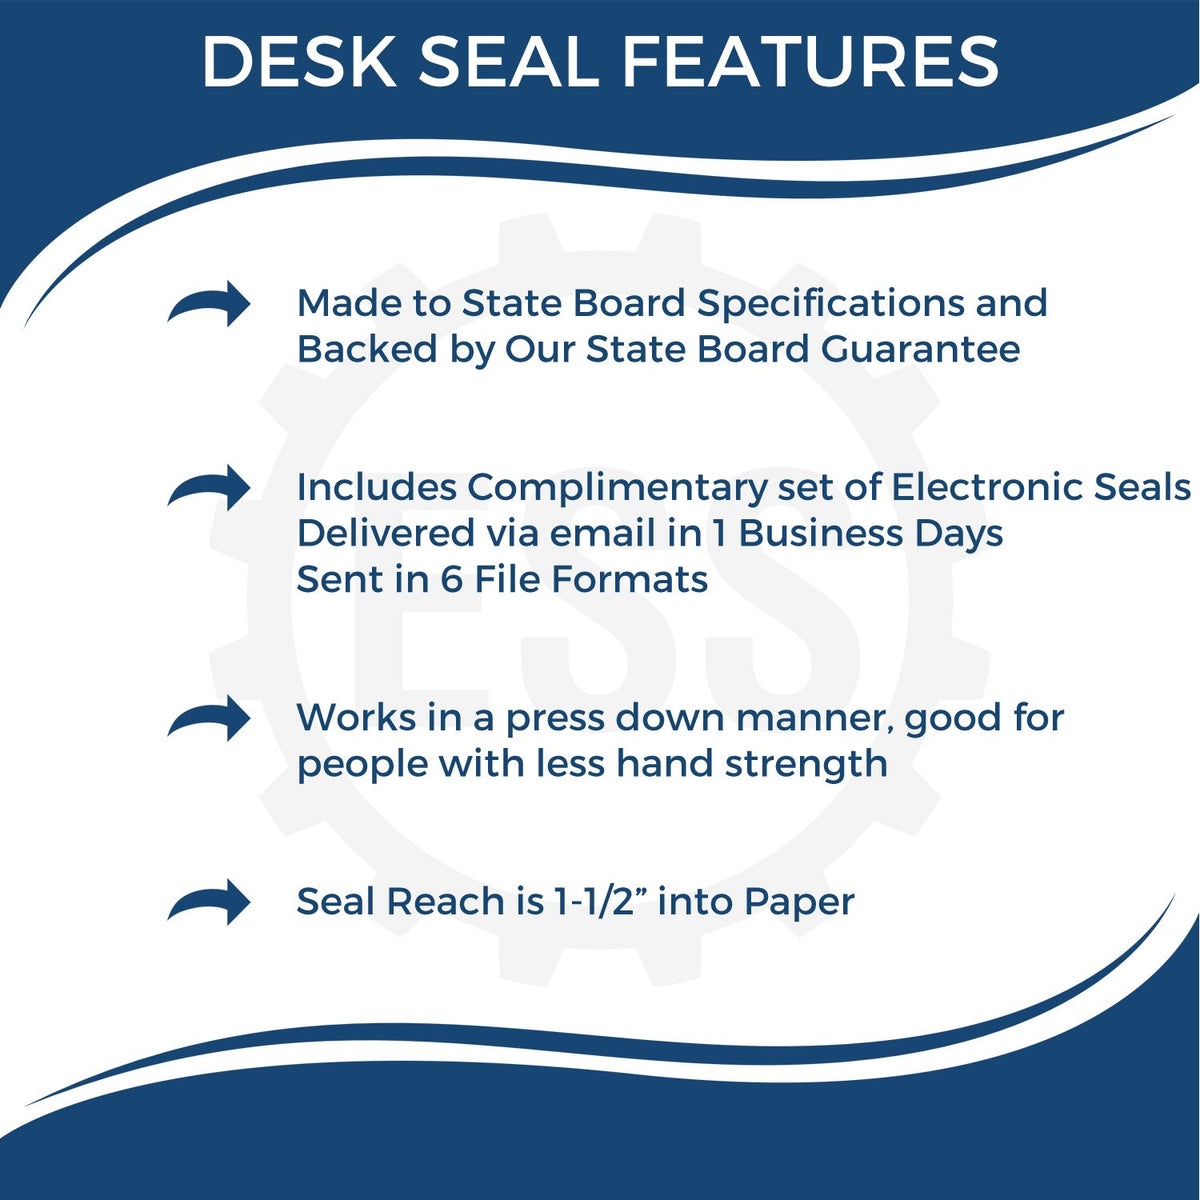 A picture of an infographic highlighting the selling points for the Nevada Desk Architect Embossing Seal